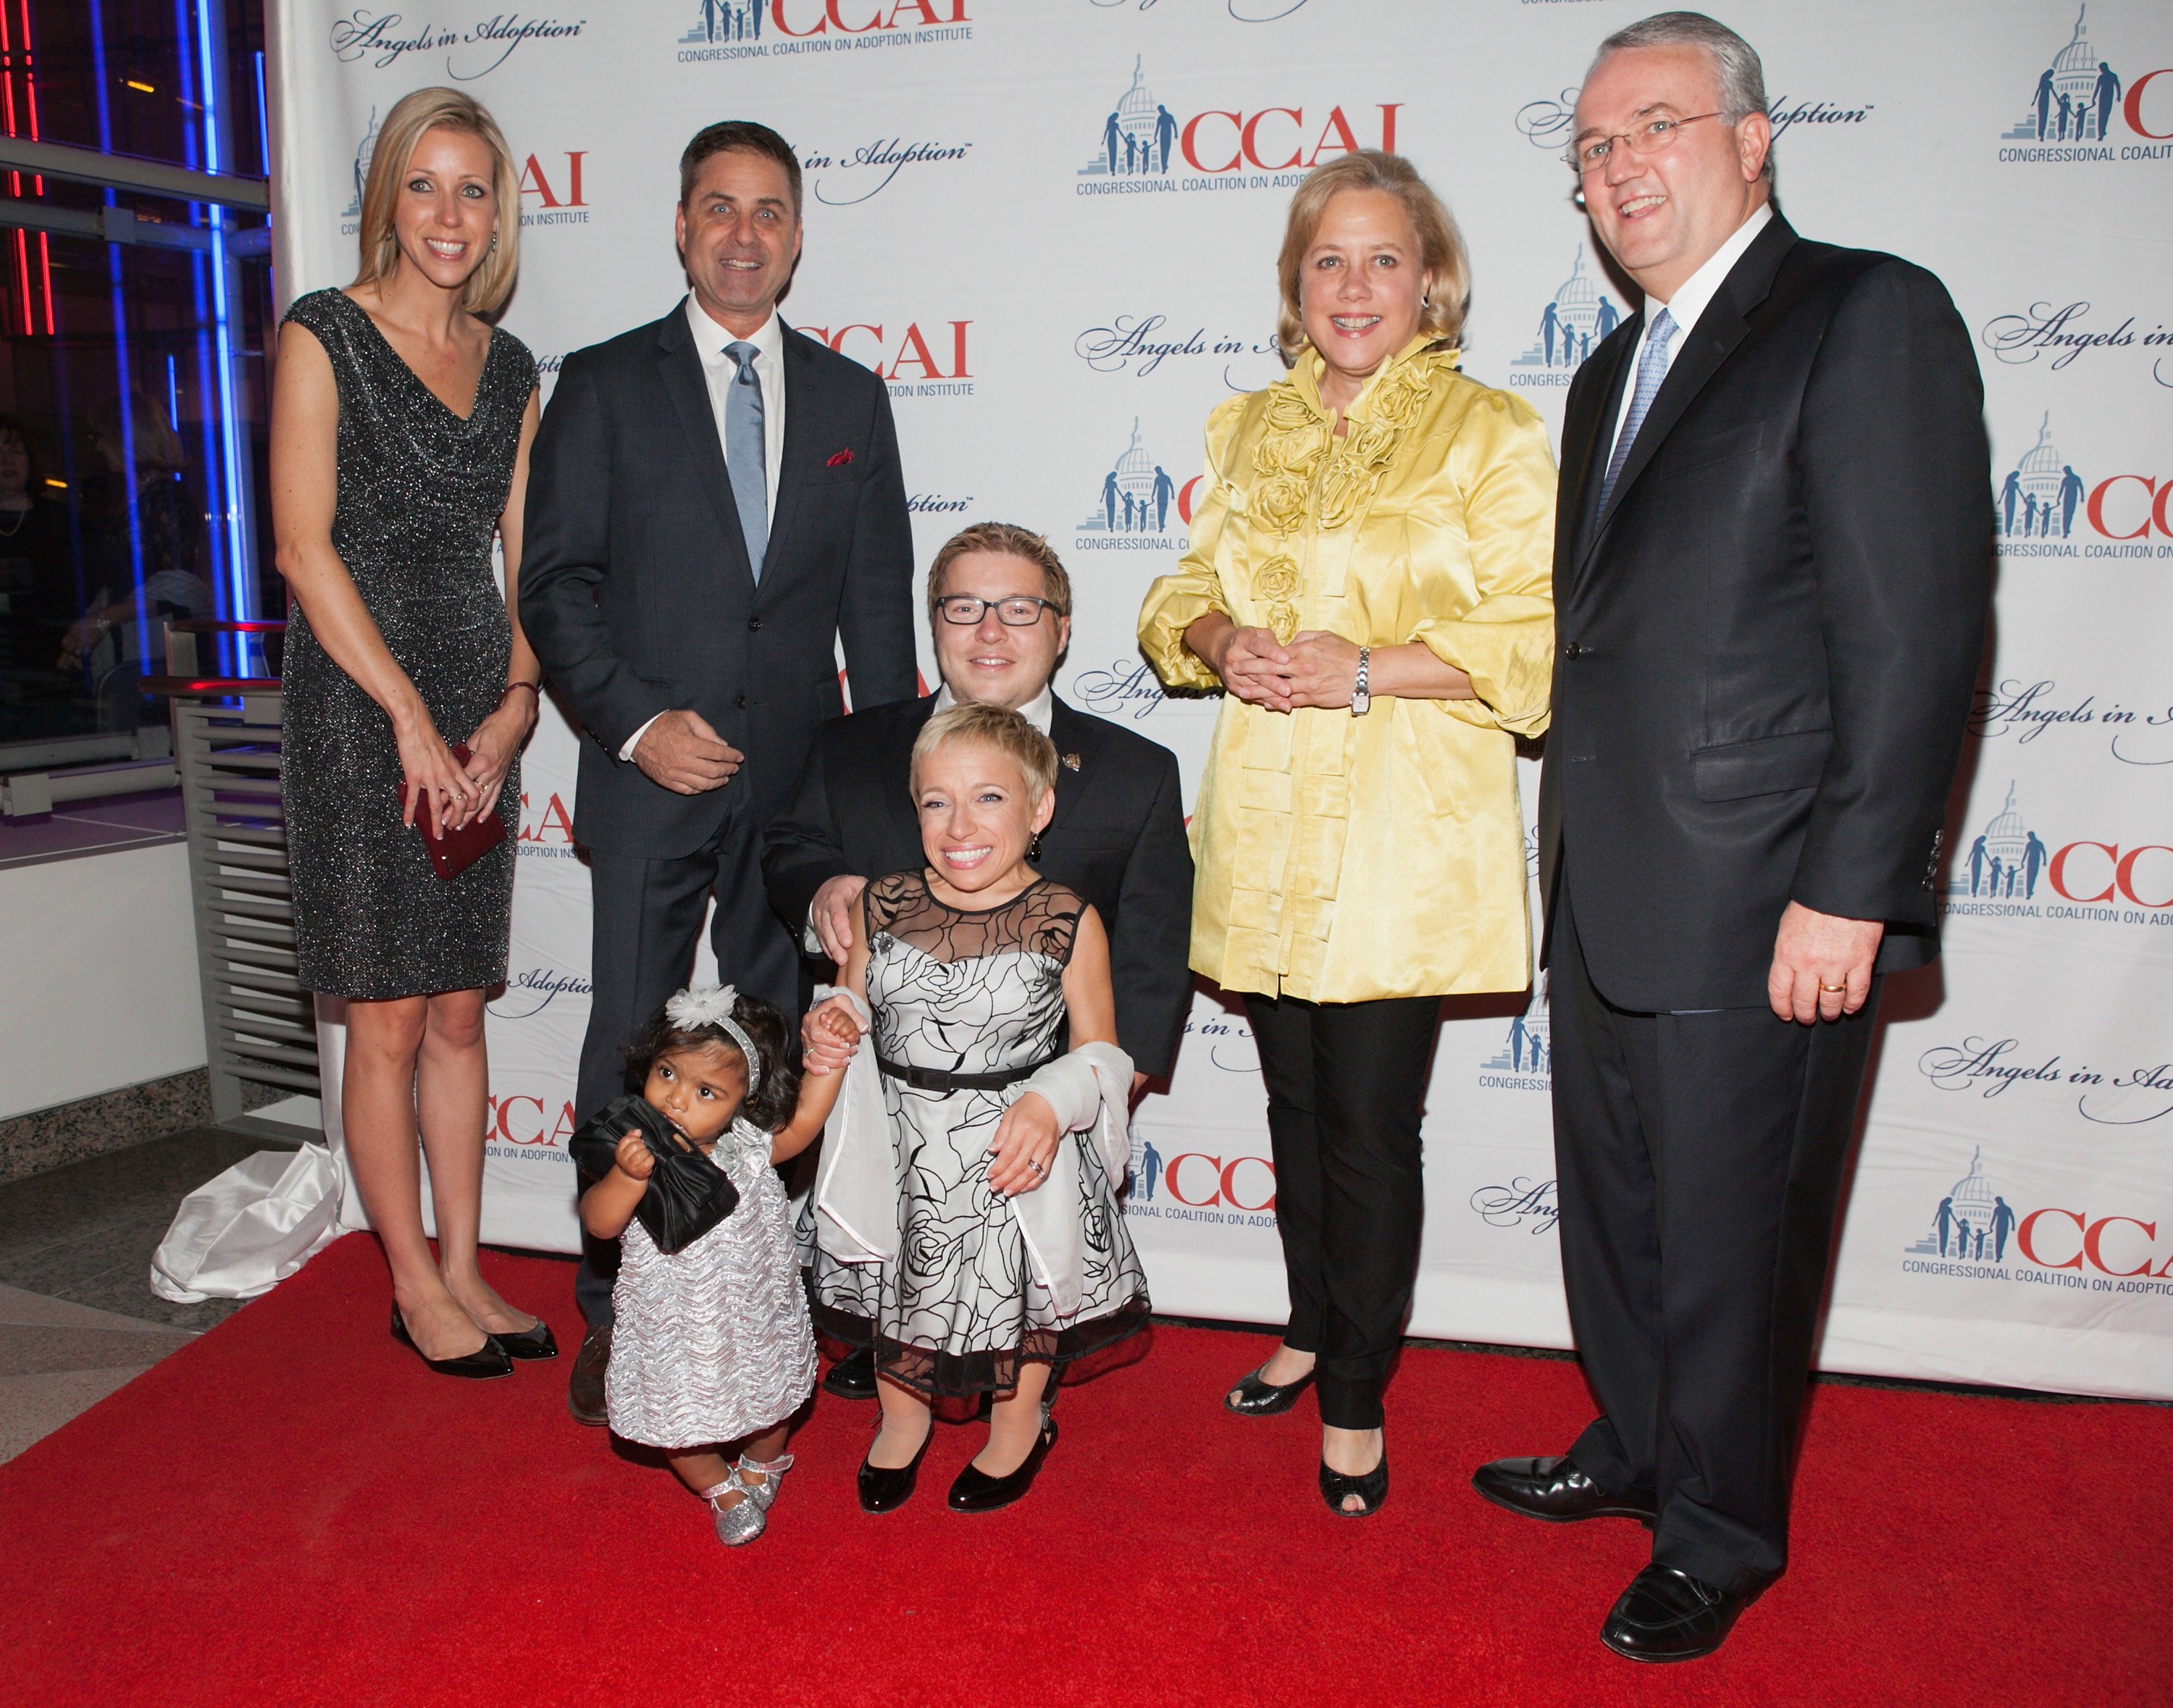 Becky Weichhand, Mark Walberg, Bill Klein, Jen Arnold with daughter Zoey, Sen. Mary Landrieu, and Jack Gerard attend the 2014 Angels In Adoption Gala in Washington, DC on September 17, 2014 | Photo: Getty Images